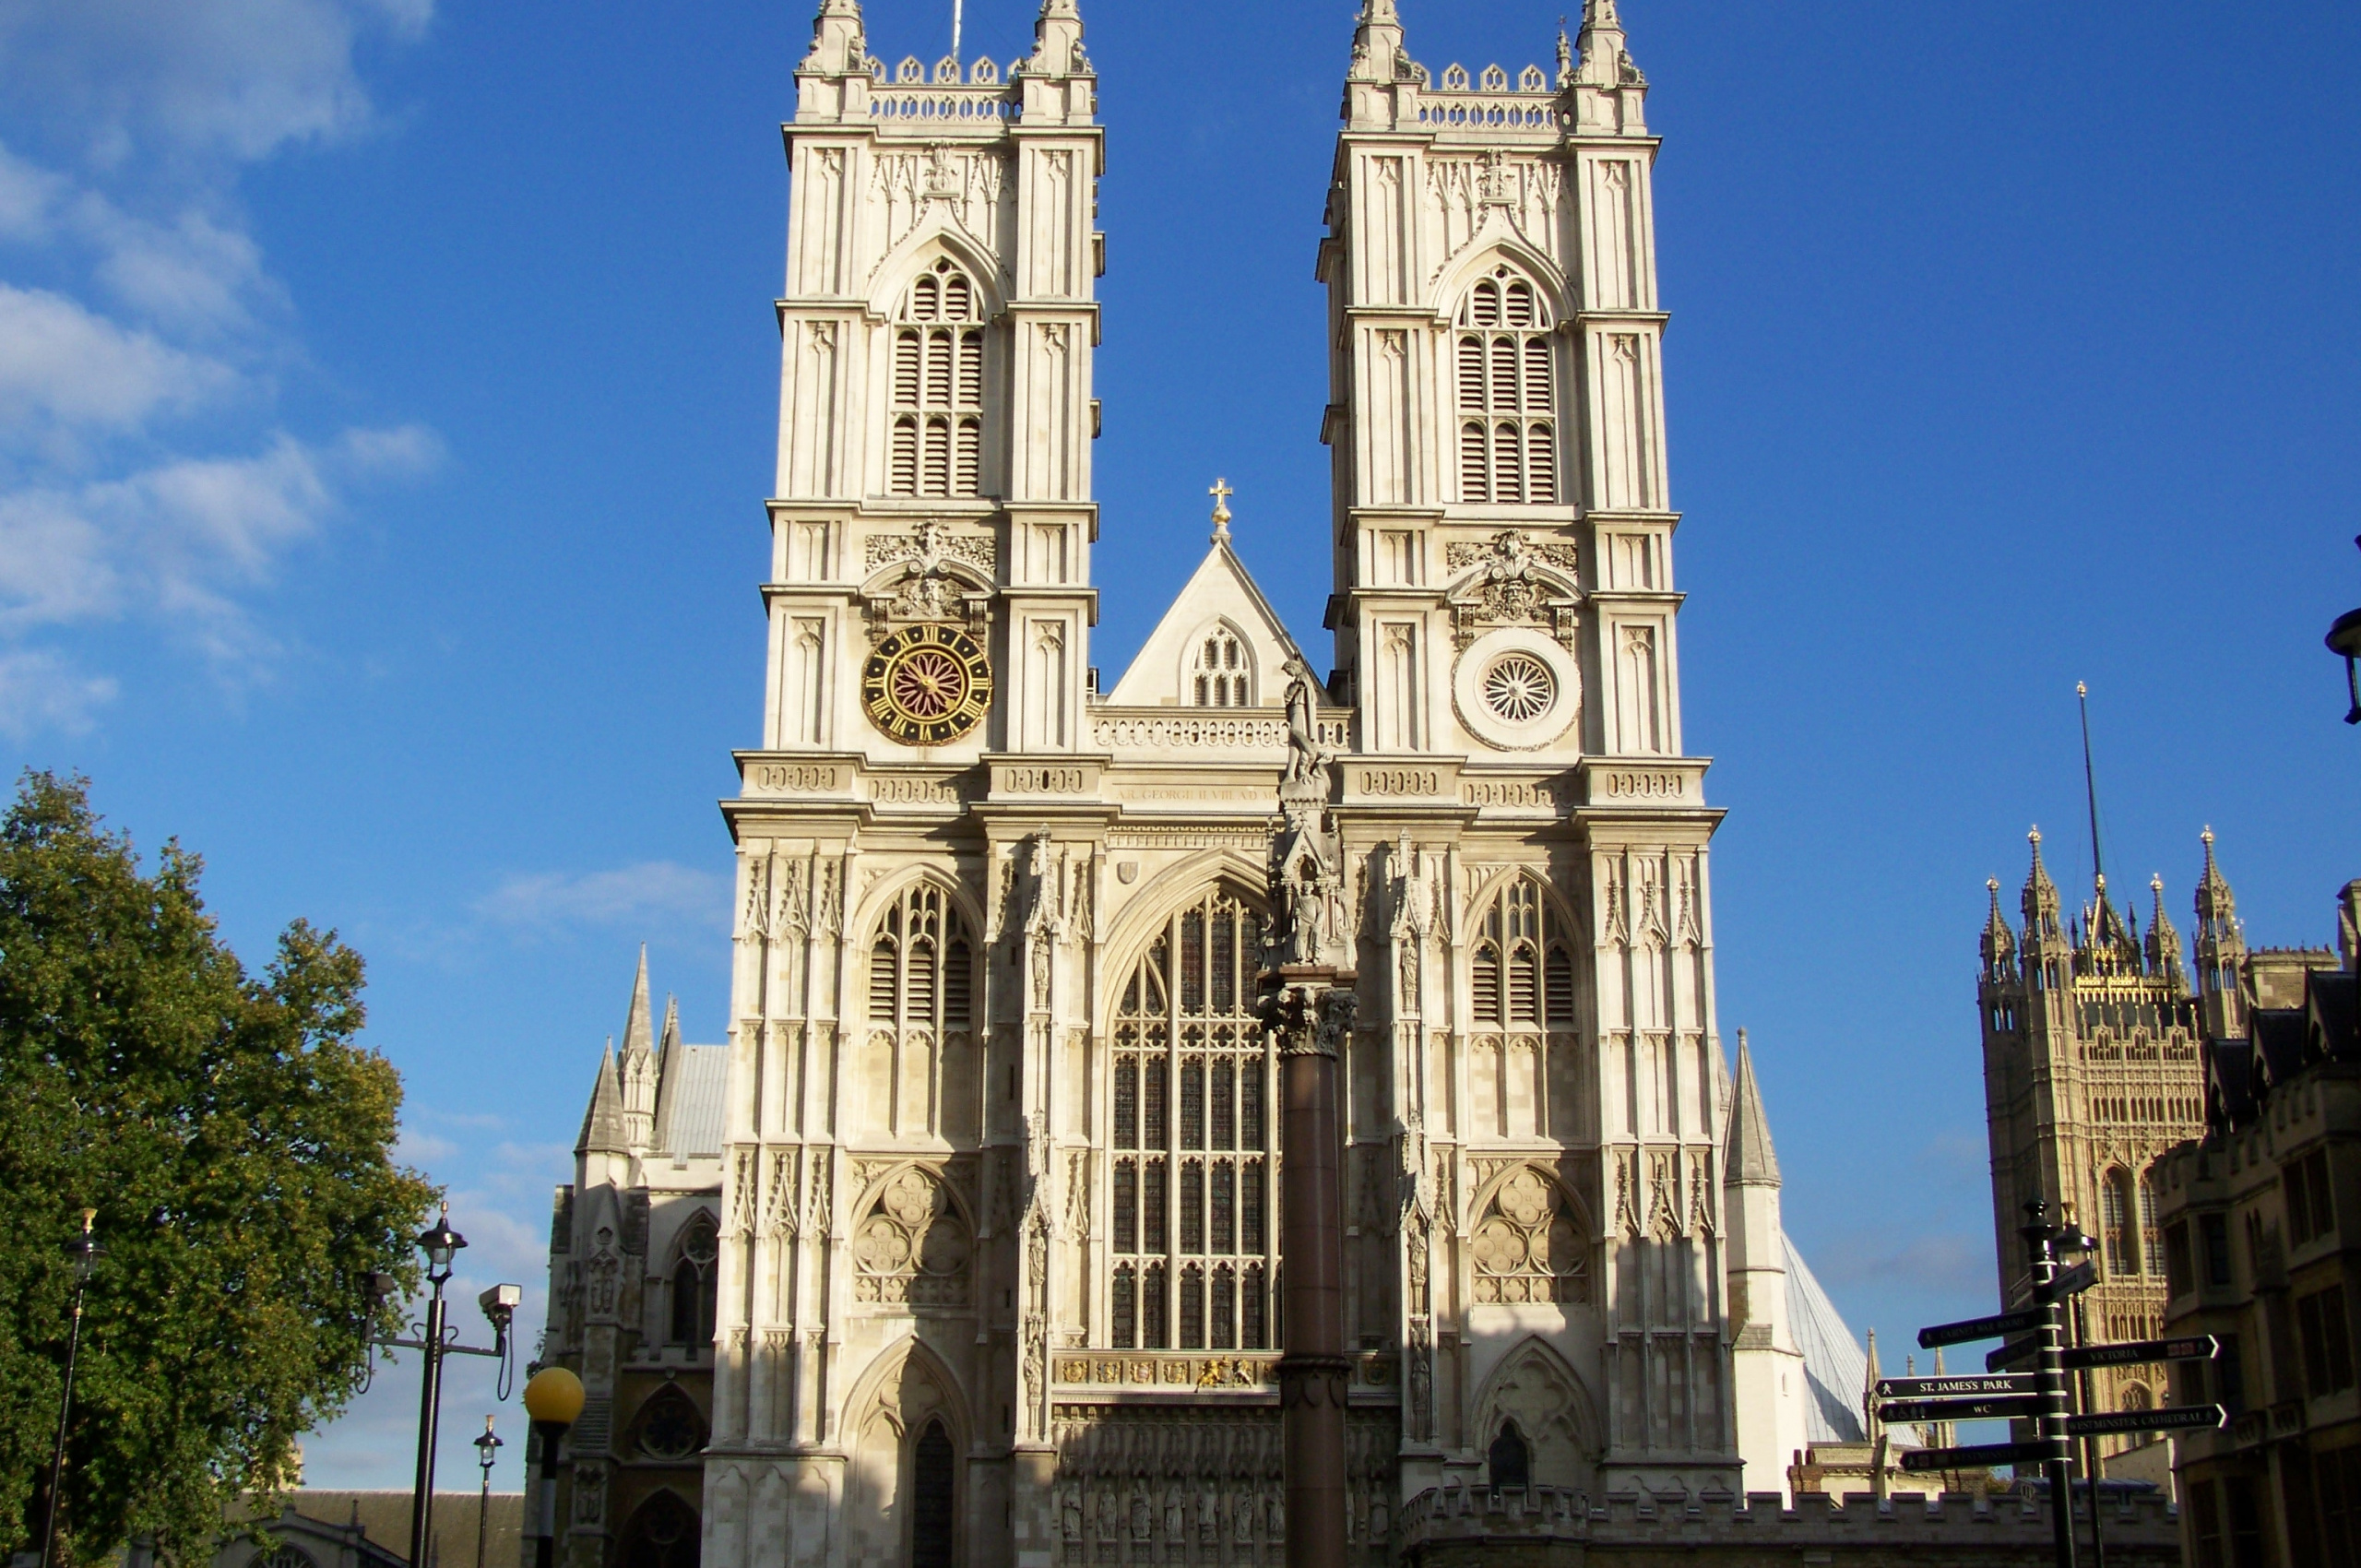 Westminster Abbey, HD wallpapers, High resolution, Image gallery, 2560x1700 HD Desktop